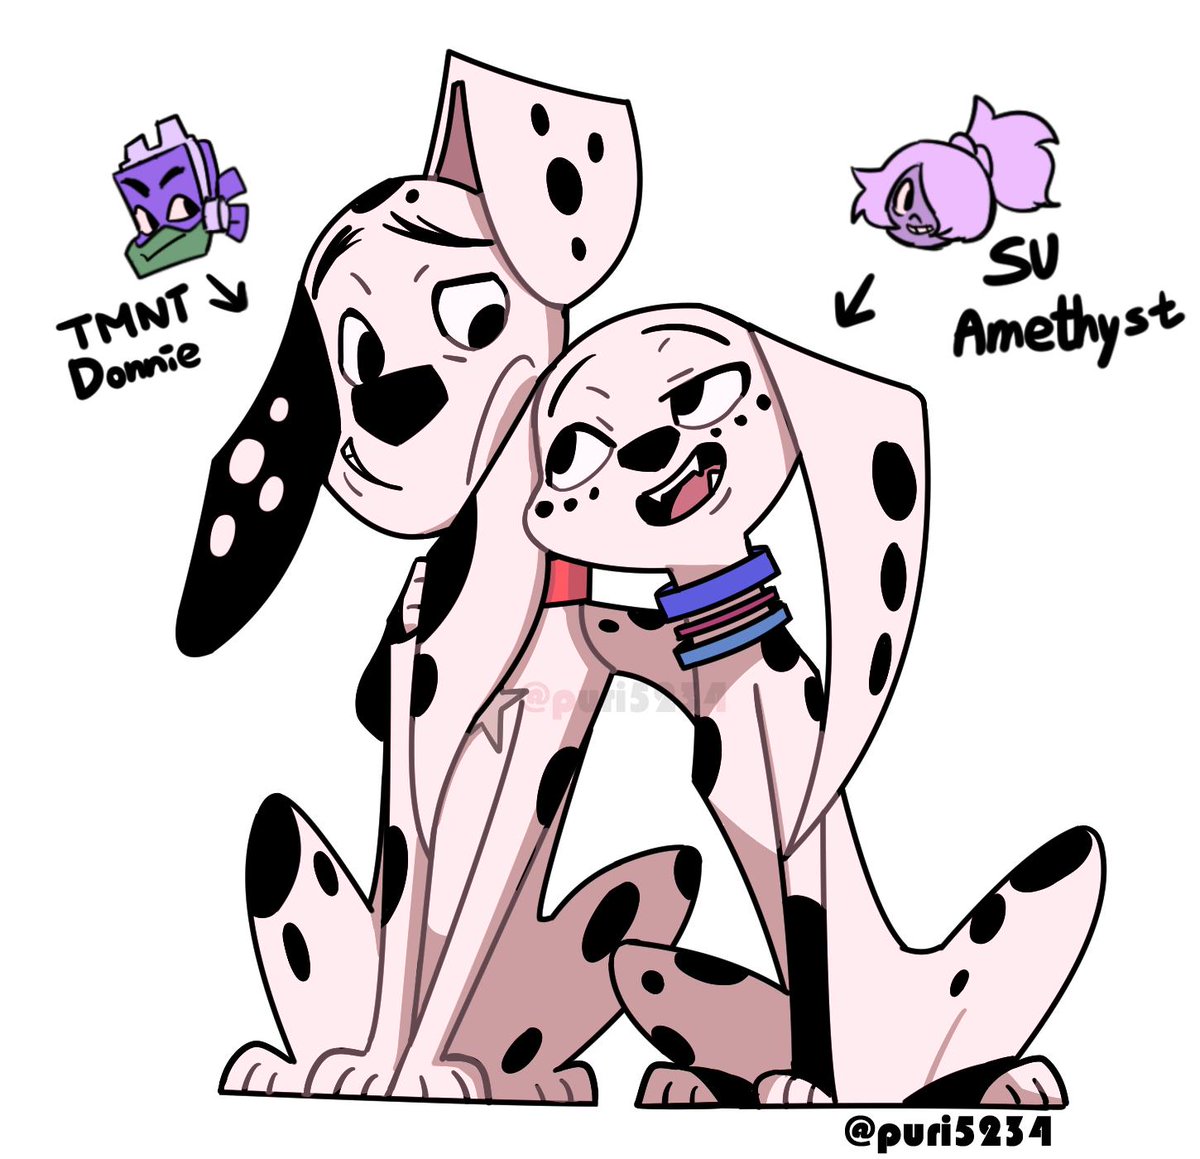 #101 Dalmatian Street Dylan and Dolly This show is good Because of the voic...